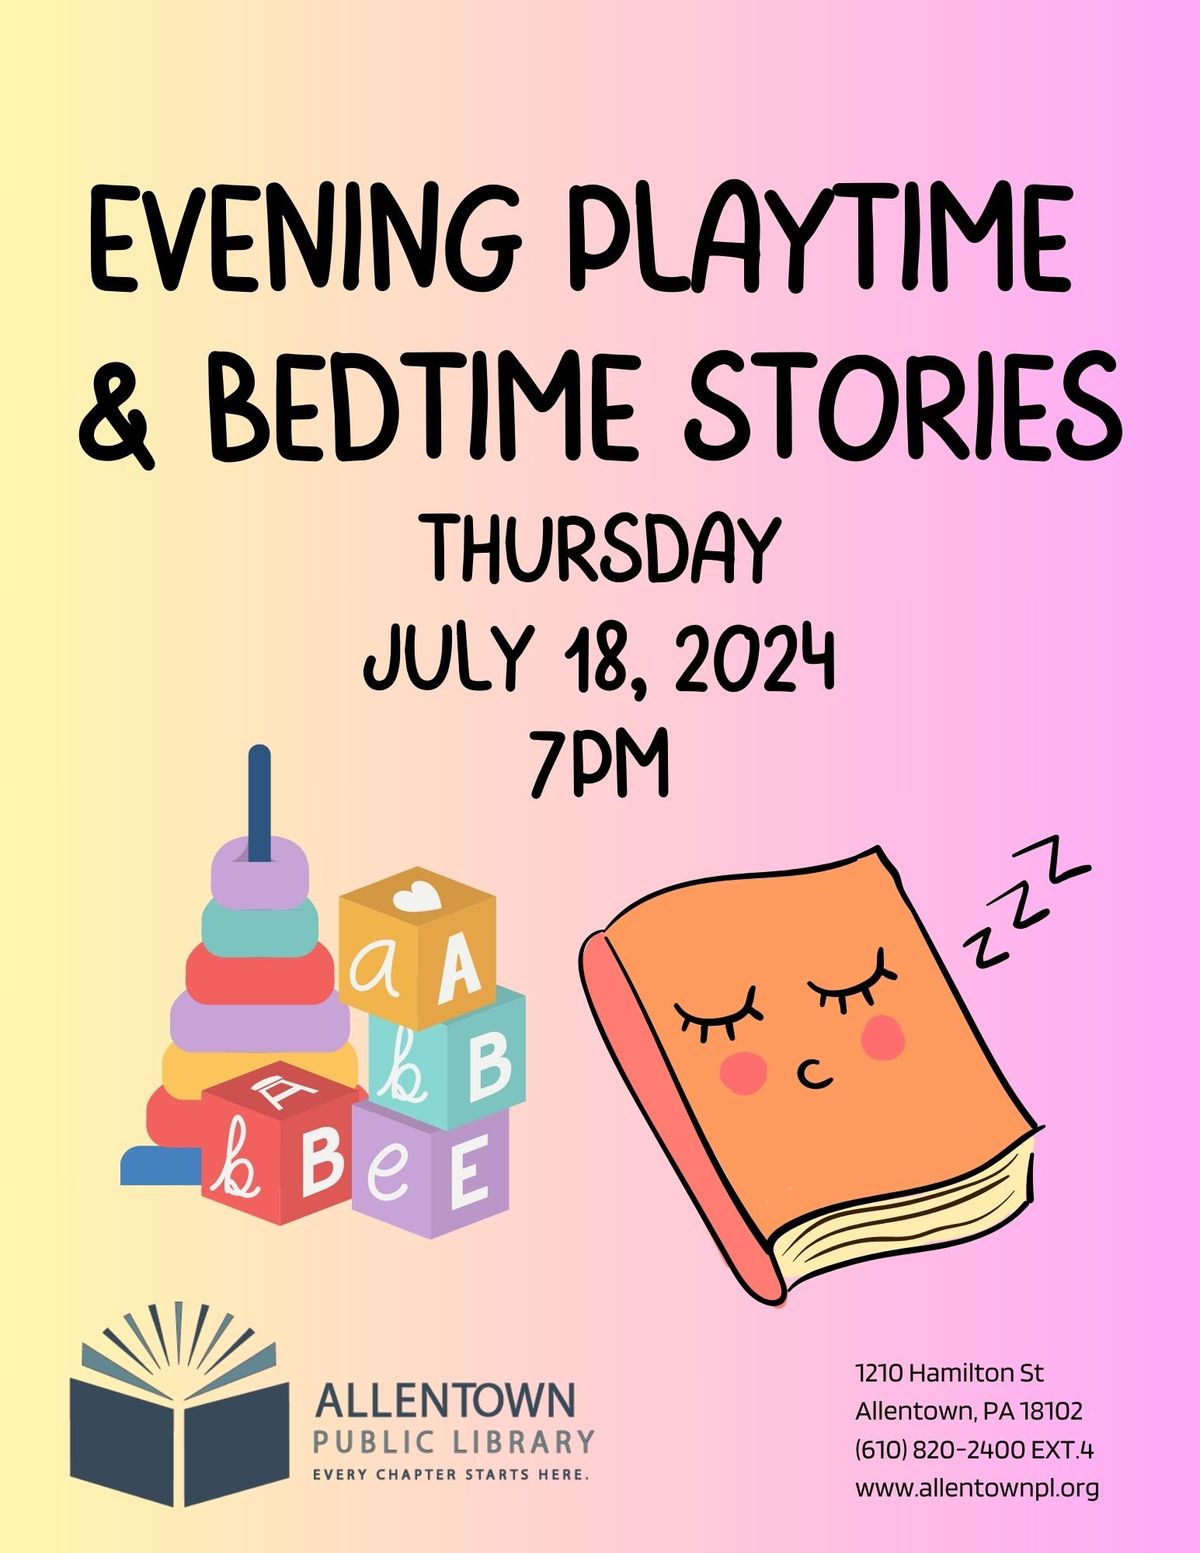 Evening Playtime & Bedtime Stories at APL